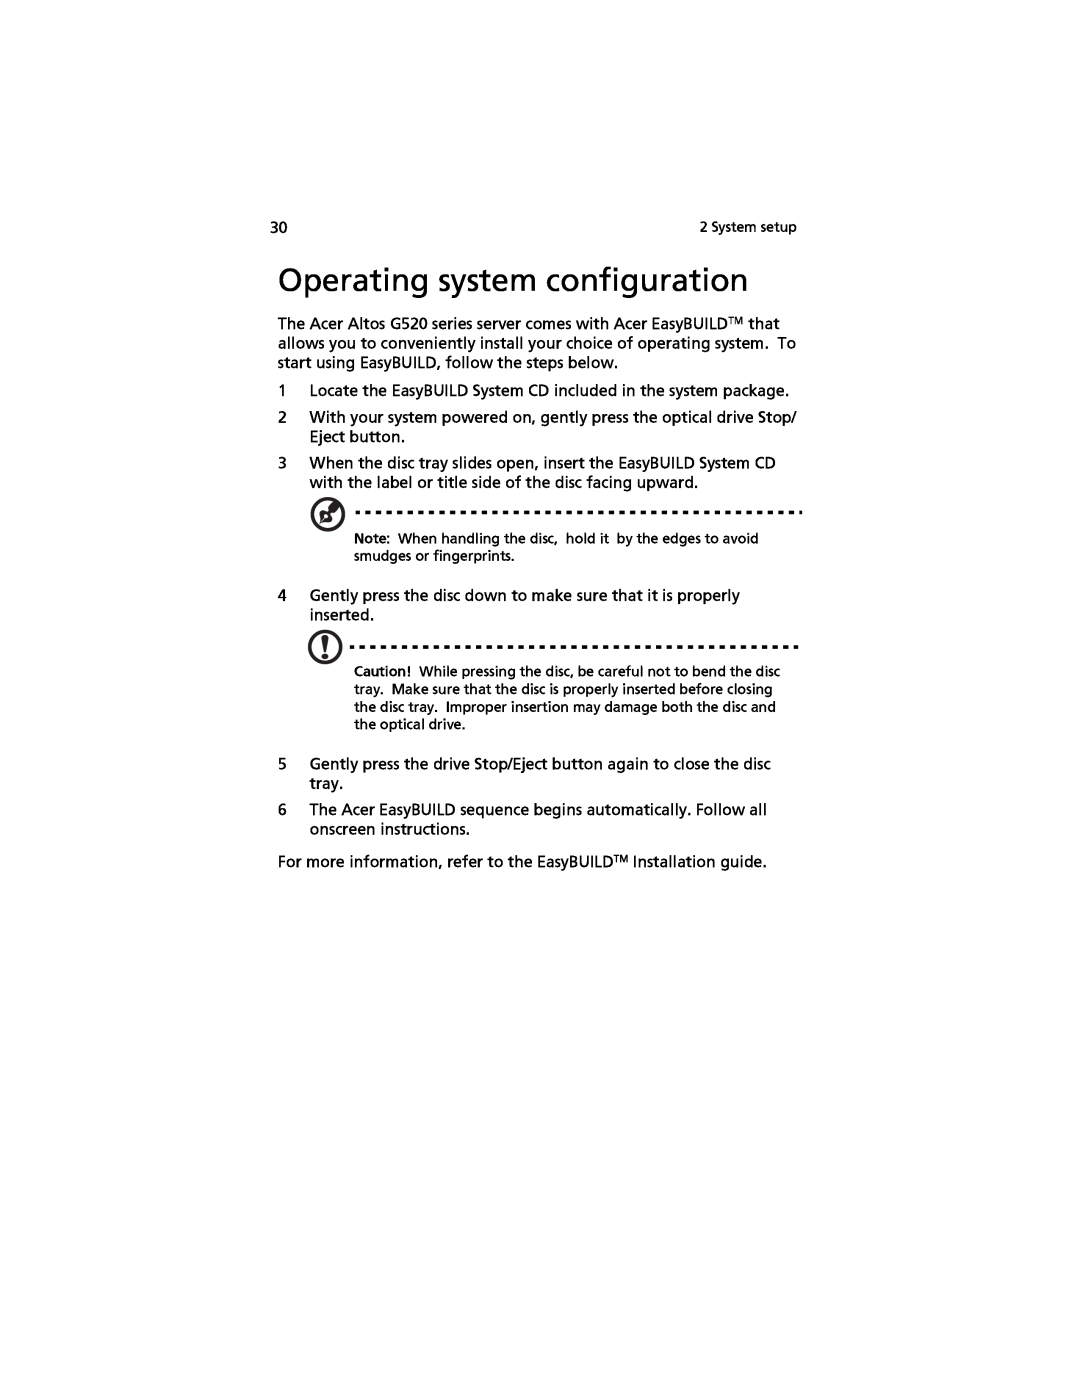 Acer G520 series manual Operating system configuration 